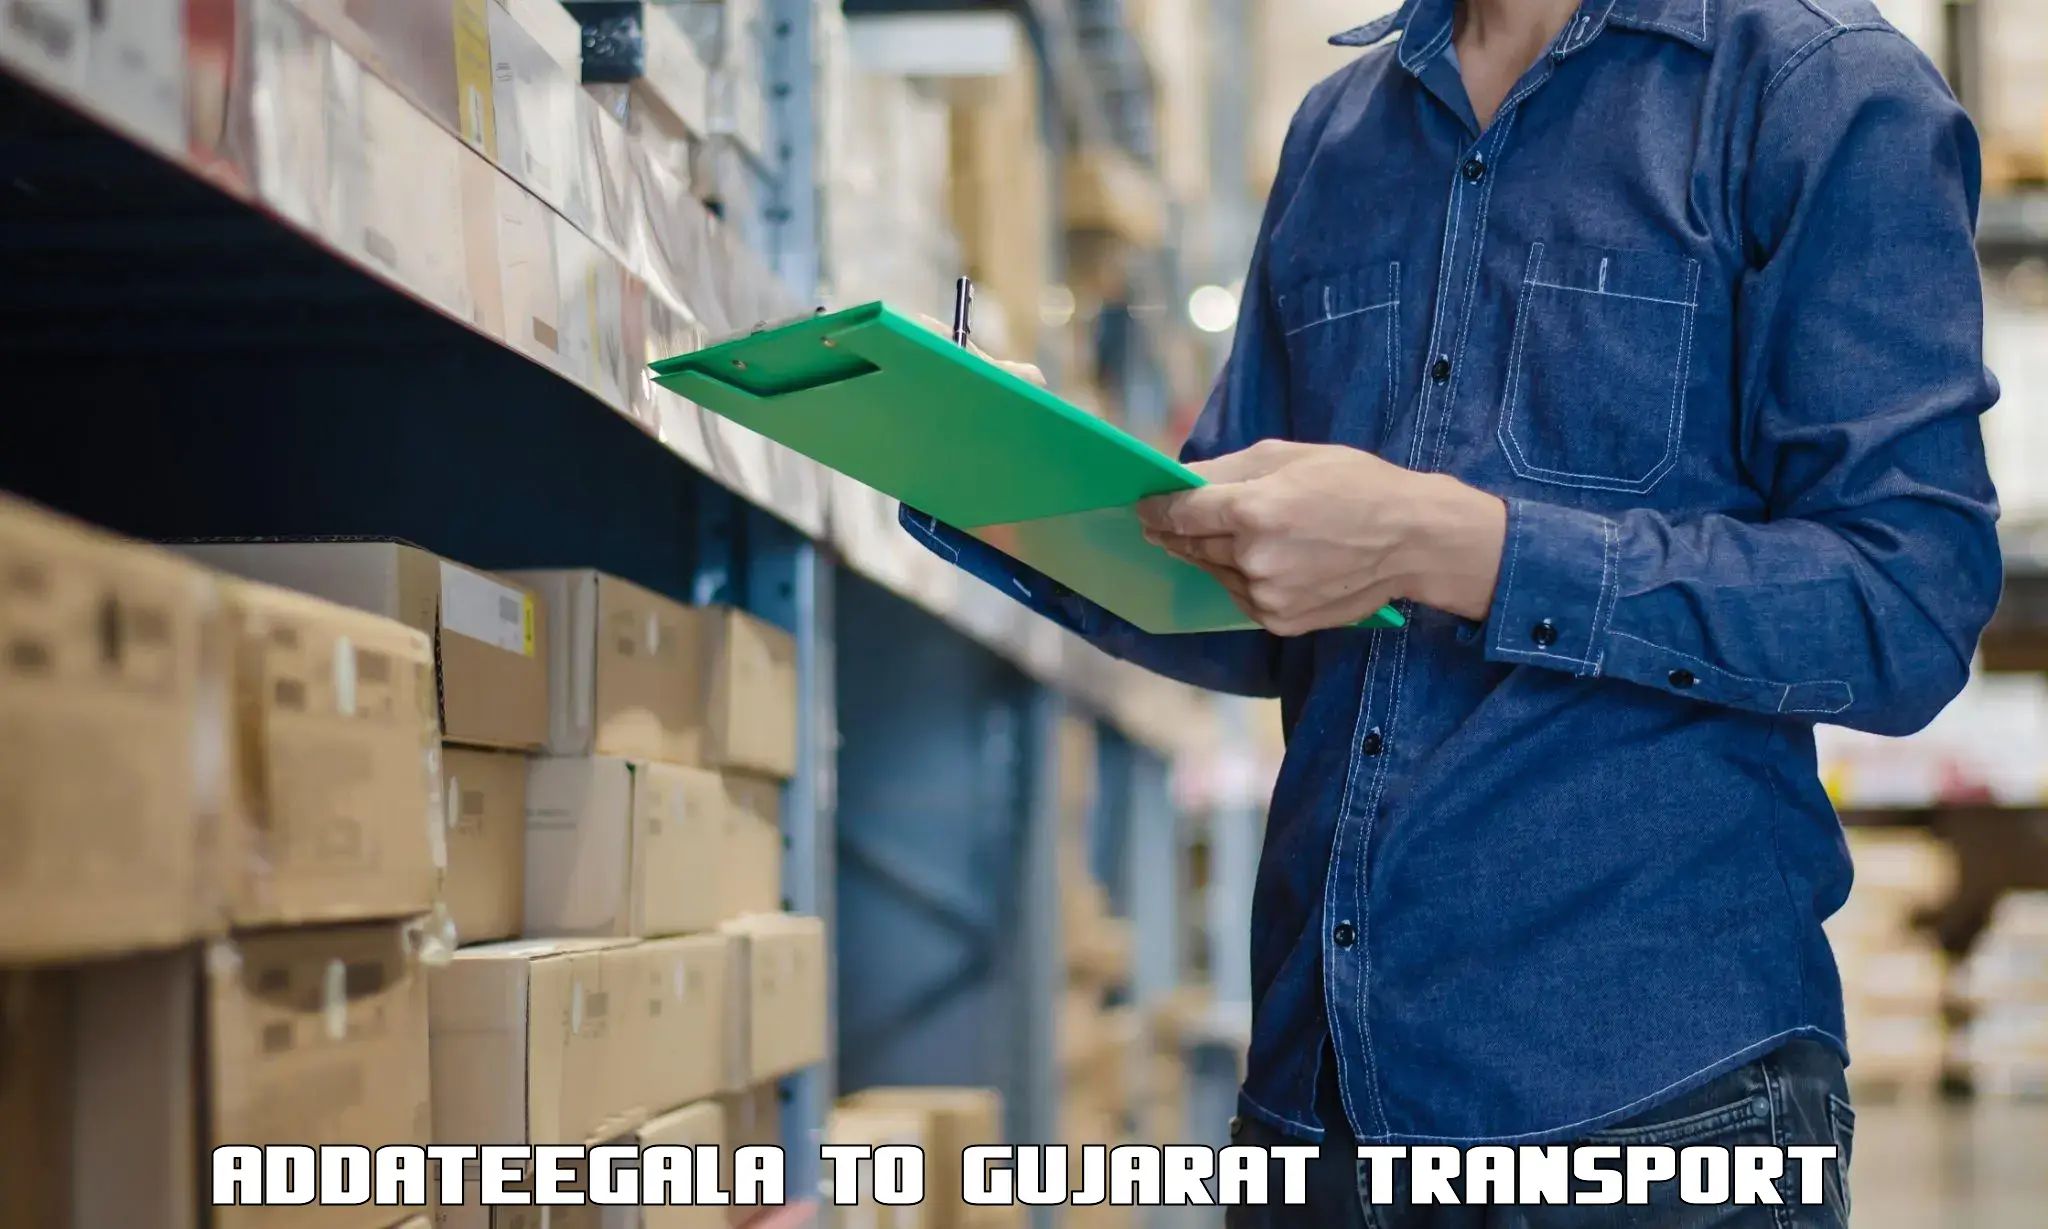 Daily transport service Addateegala to Surat